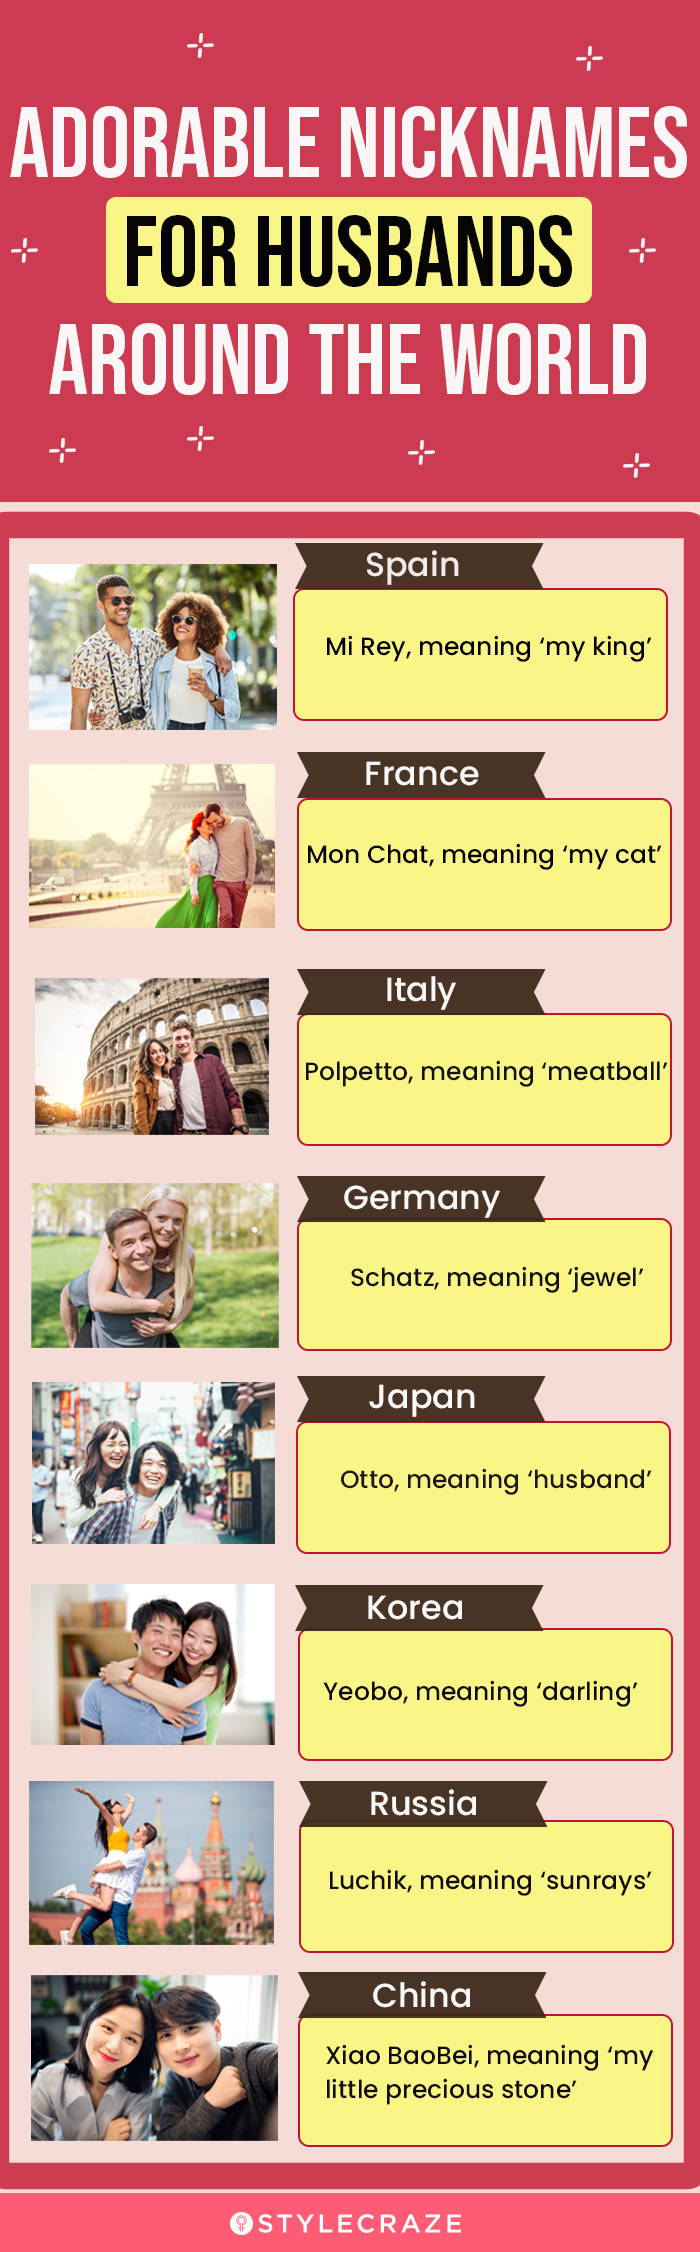 adorable nicknames for husbands around the world (infographic)